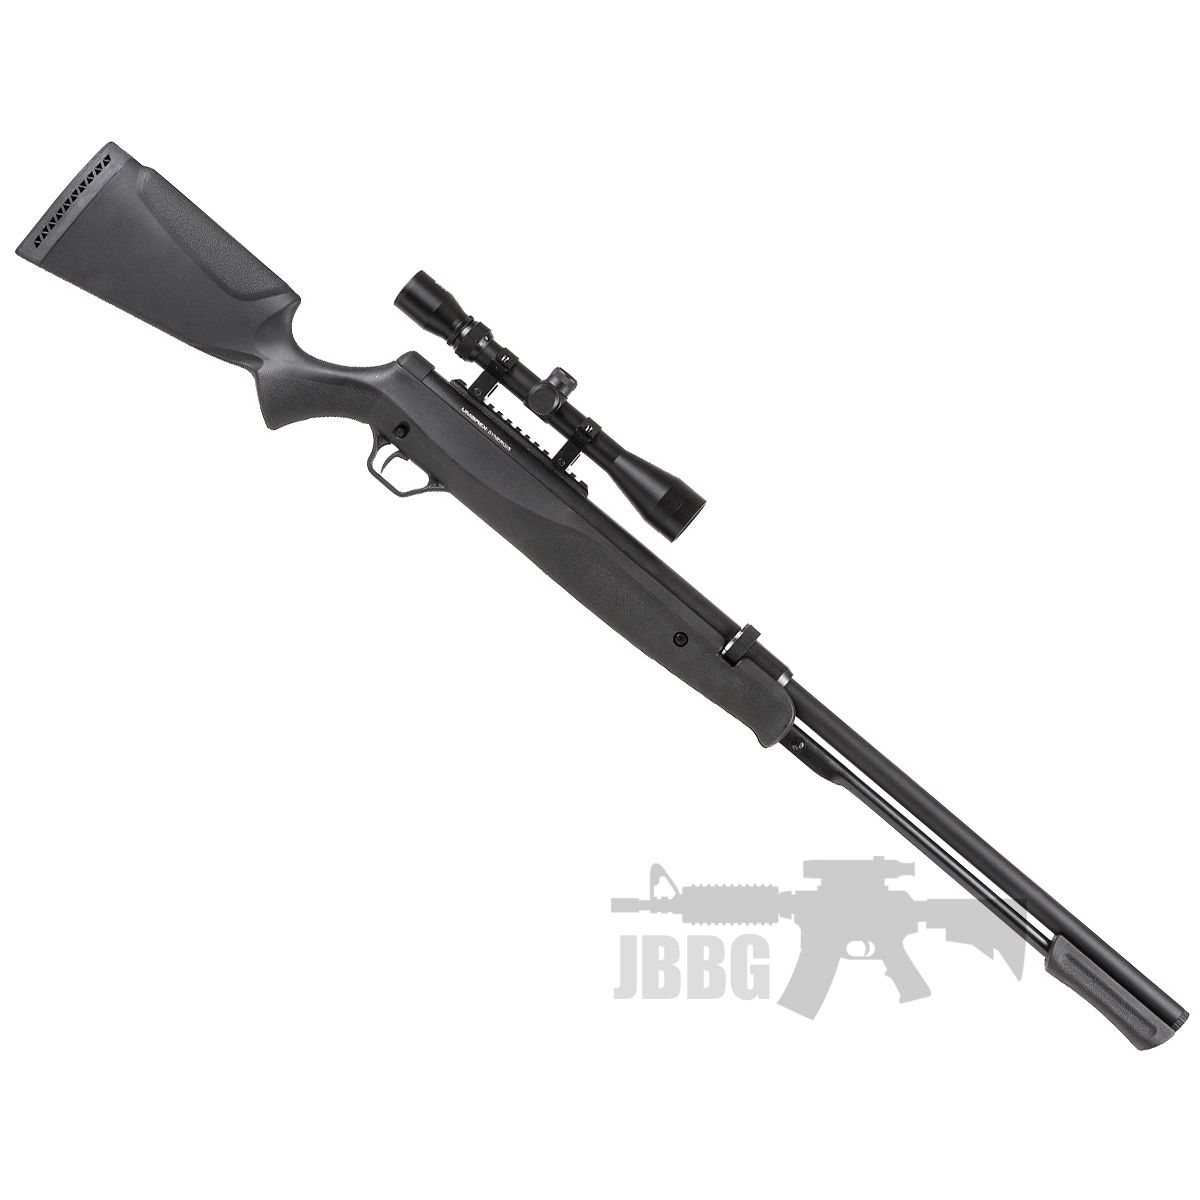 Details about   RWS-Umarex SYNERGIS Combo Air Rifle 3-9x40 Scope .177 Pellet Cal 1200 FPS 12Rd 